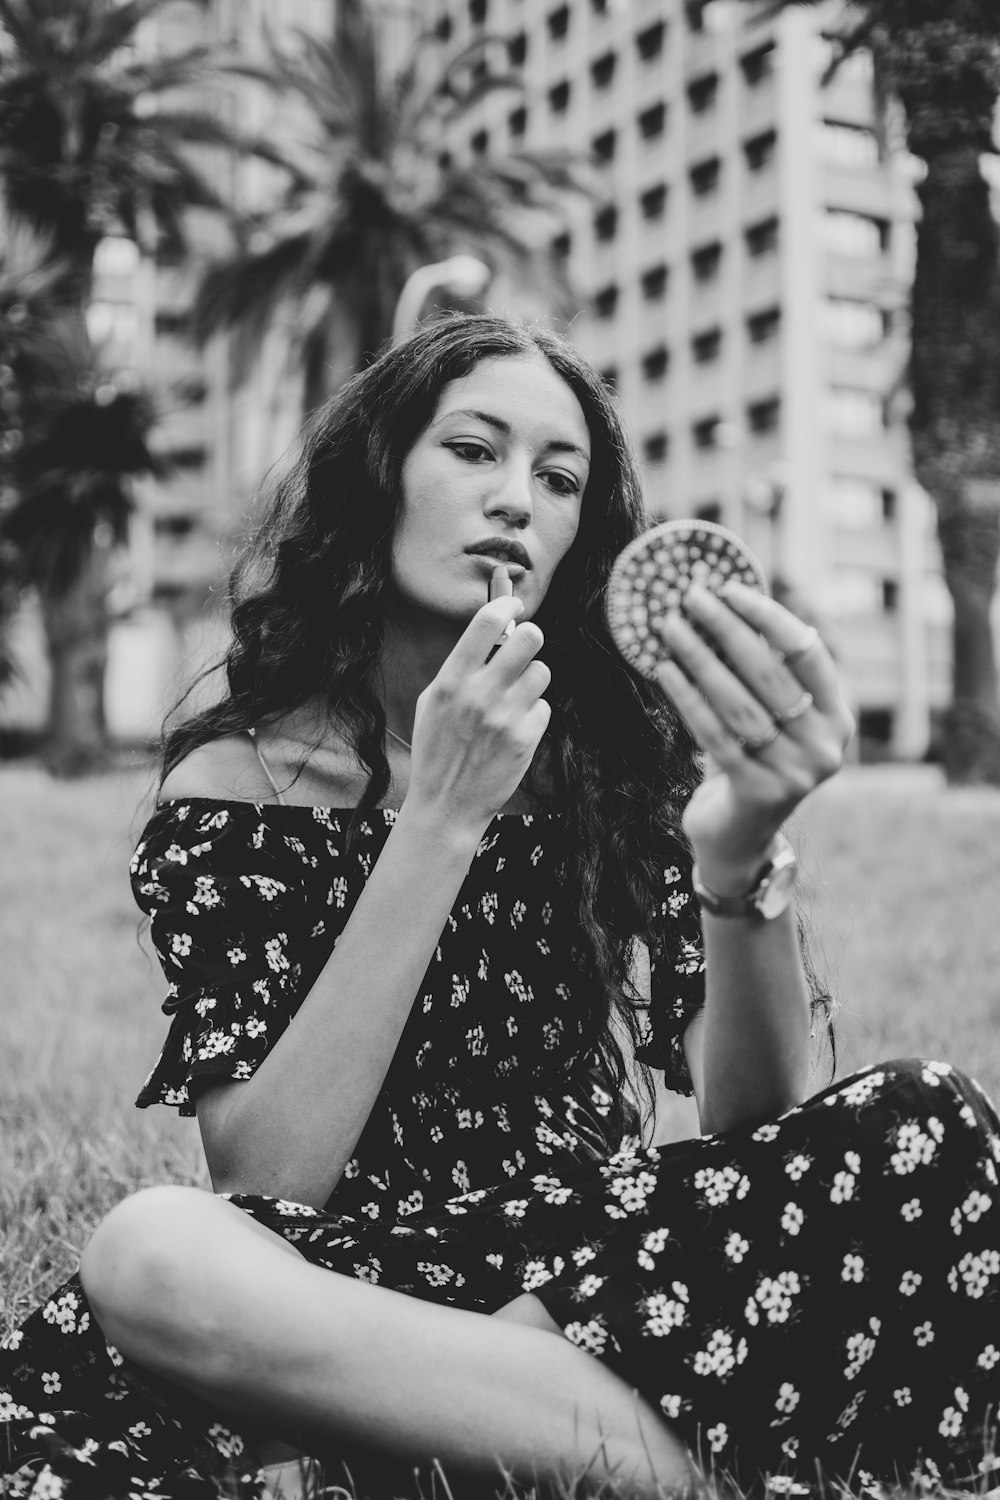 grayscale photo of woman in floral dress holding round fruit